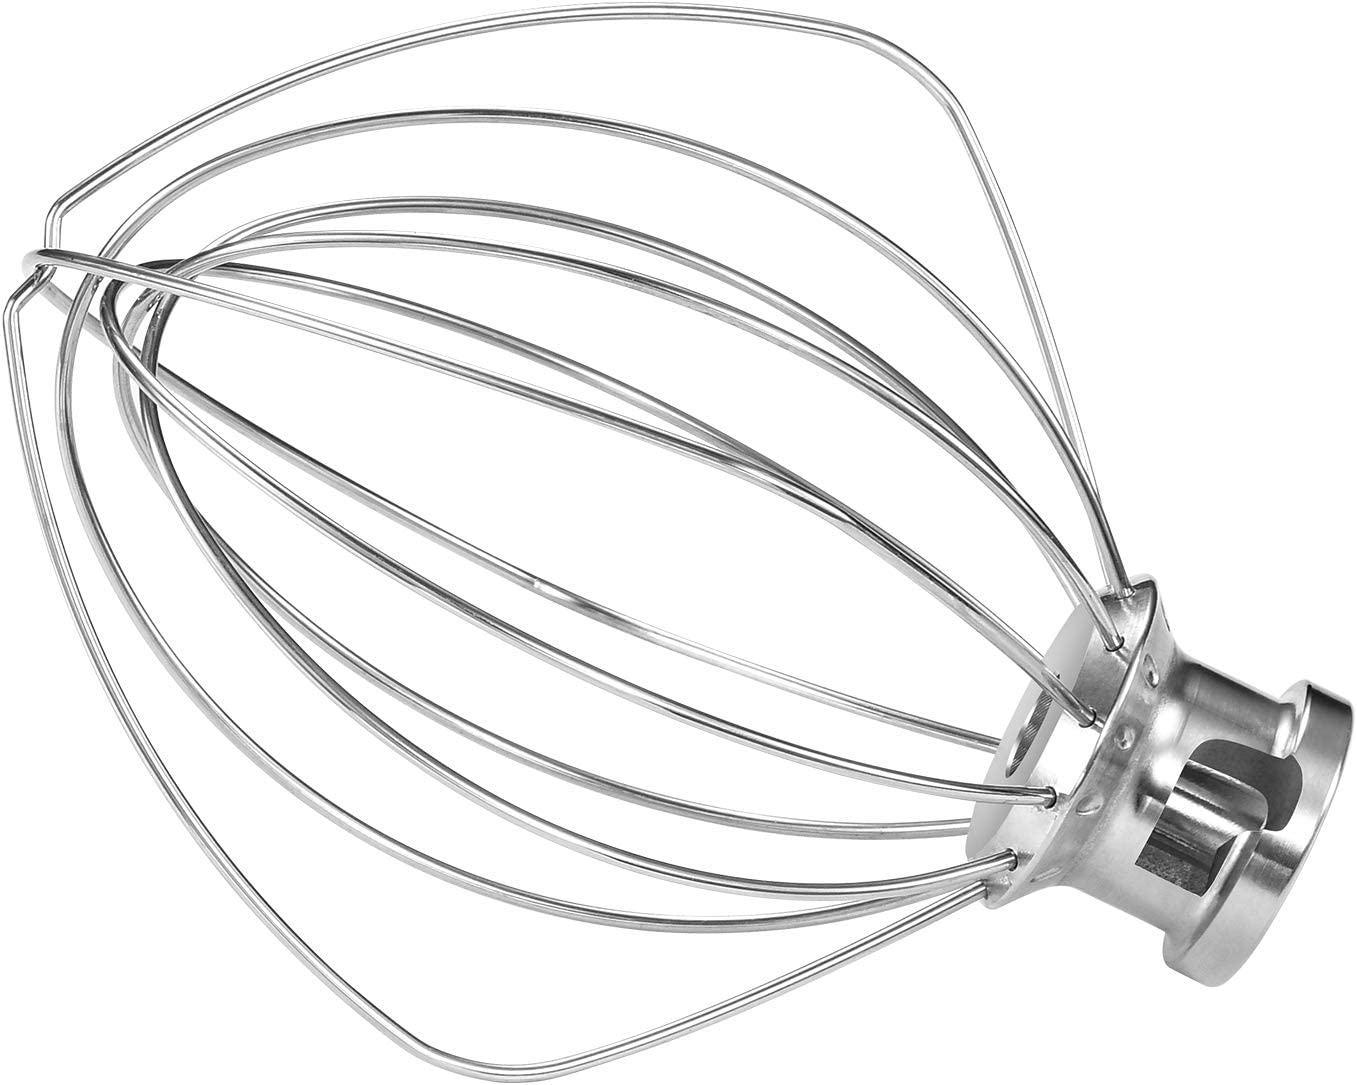 Replacement 9704329 Mixer K45WW Wire Whip for KitchenAid / Whirlpool